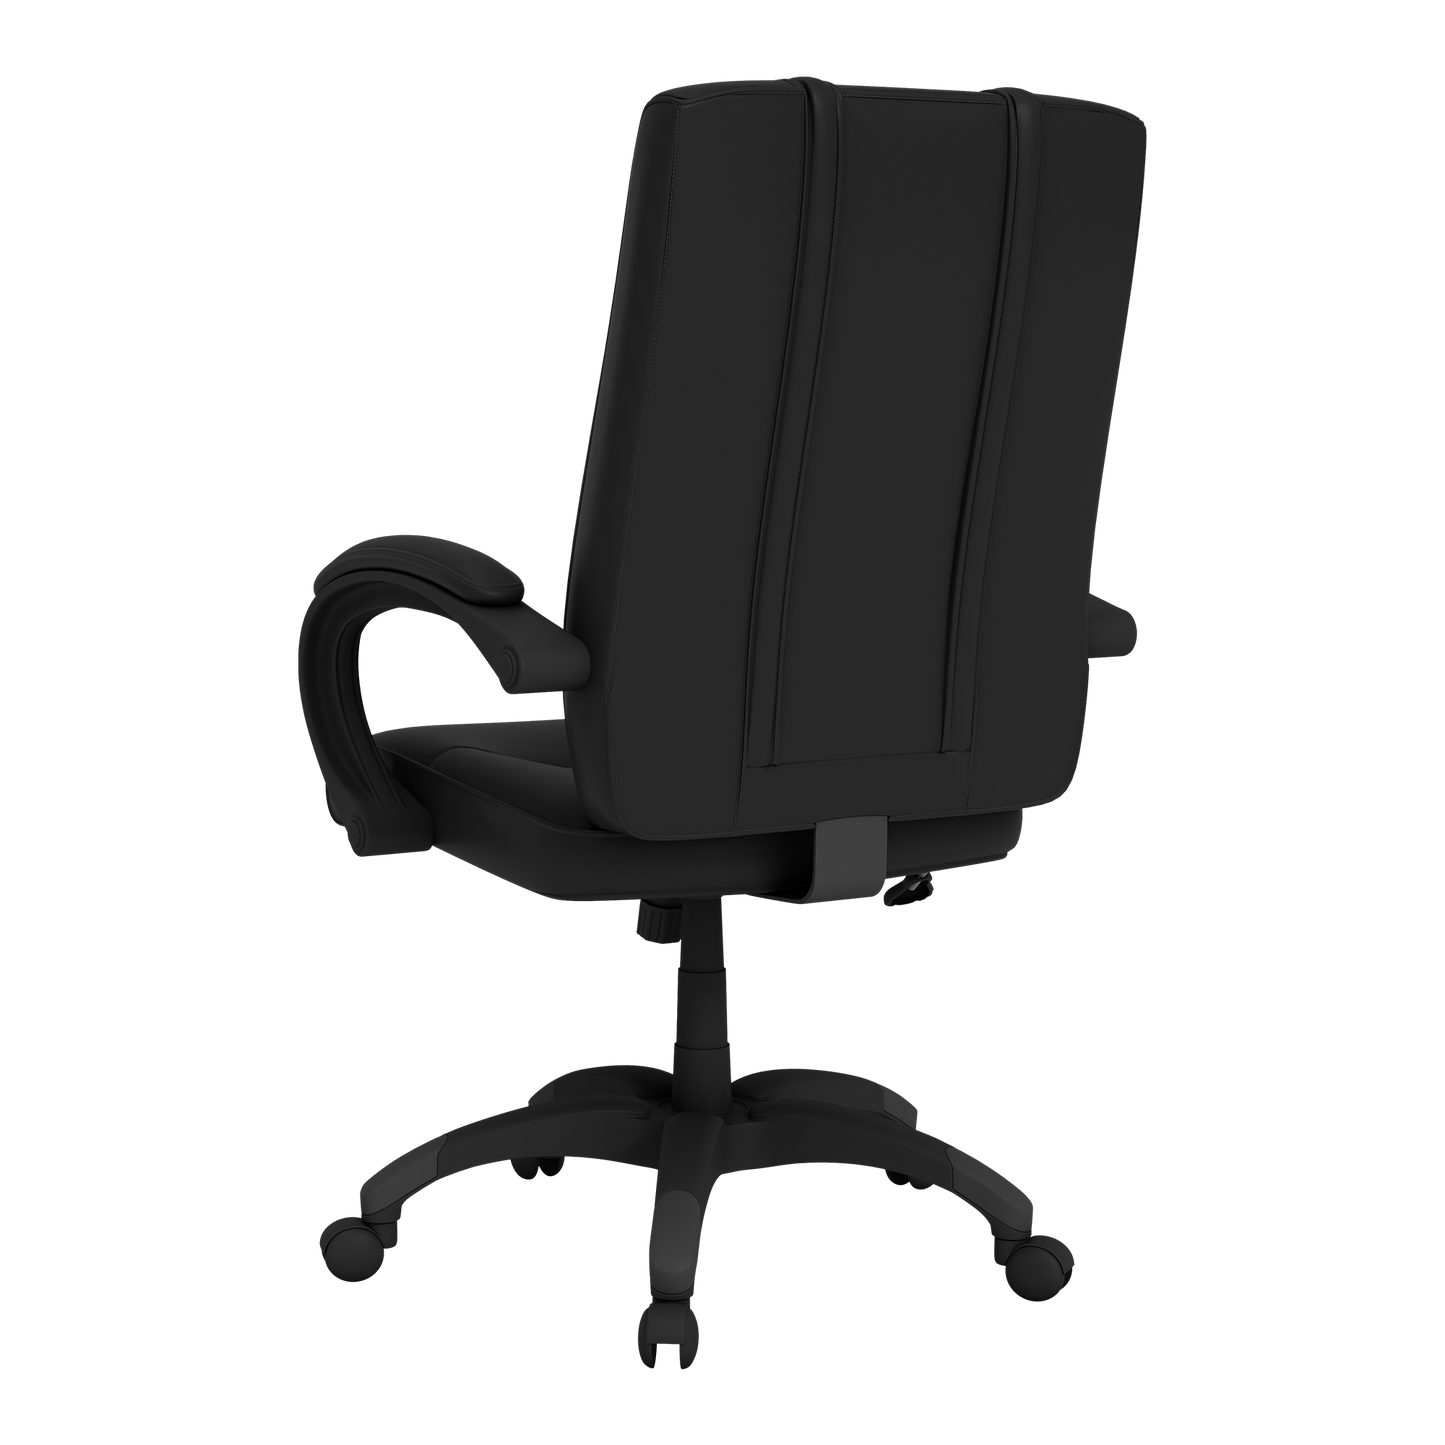 Office Chair 1000 with Buick Logo